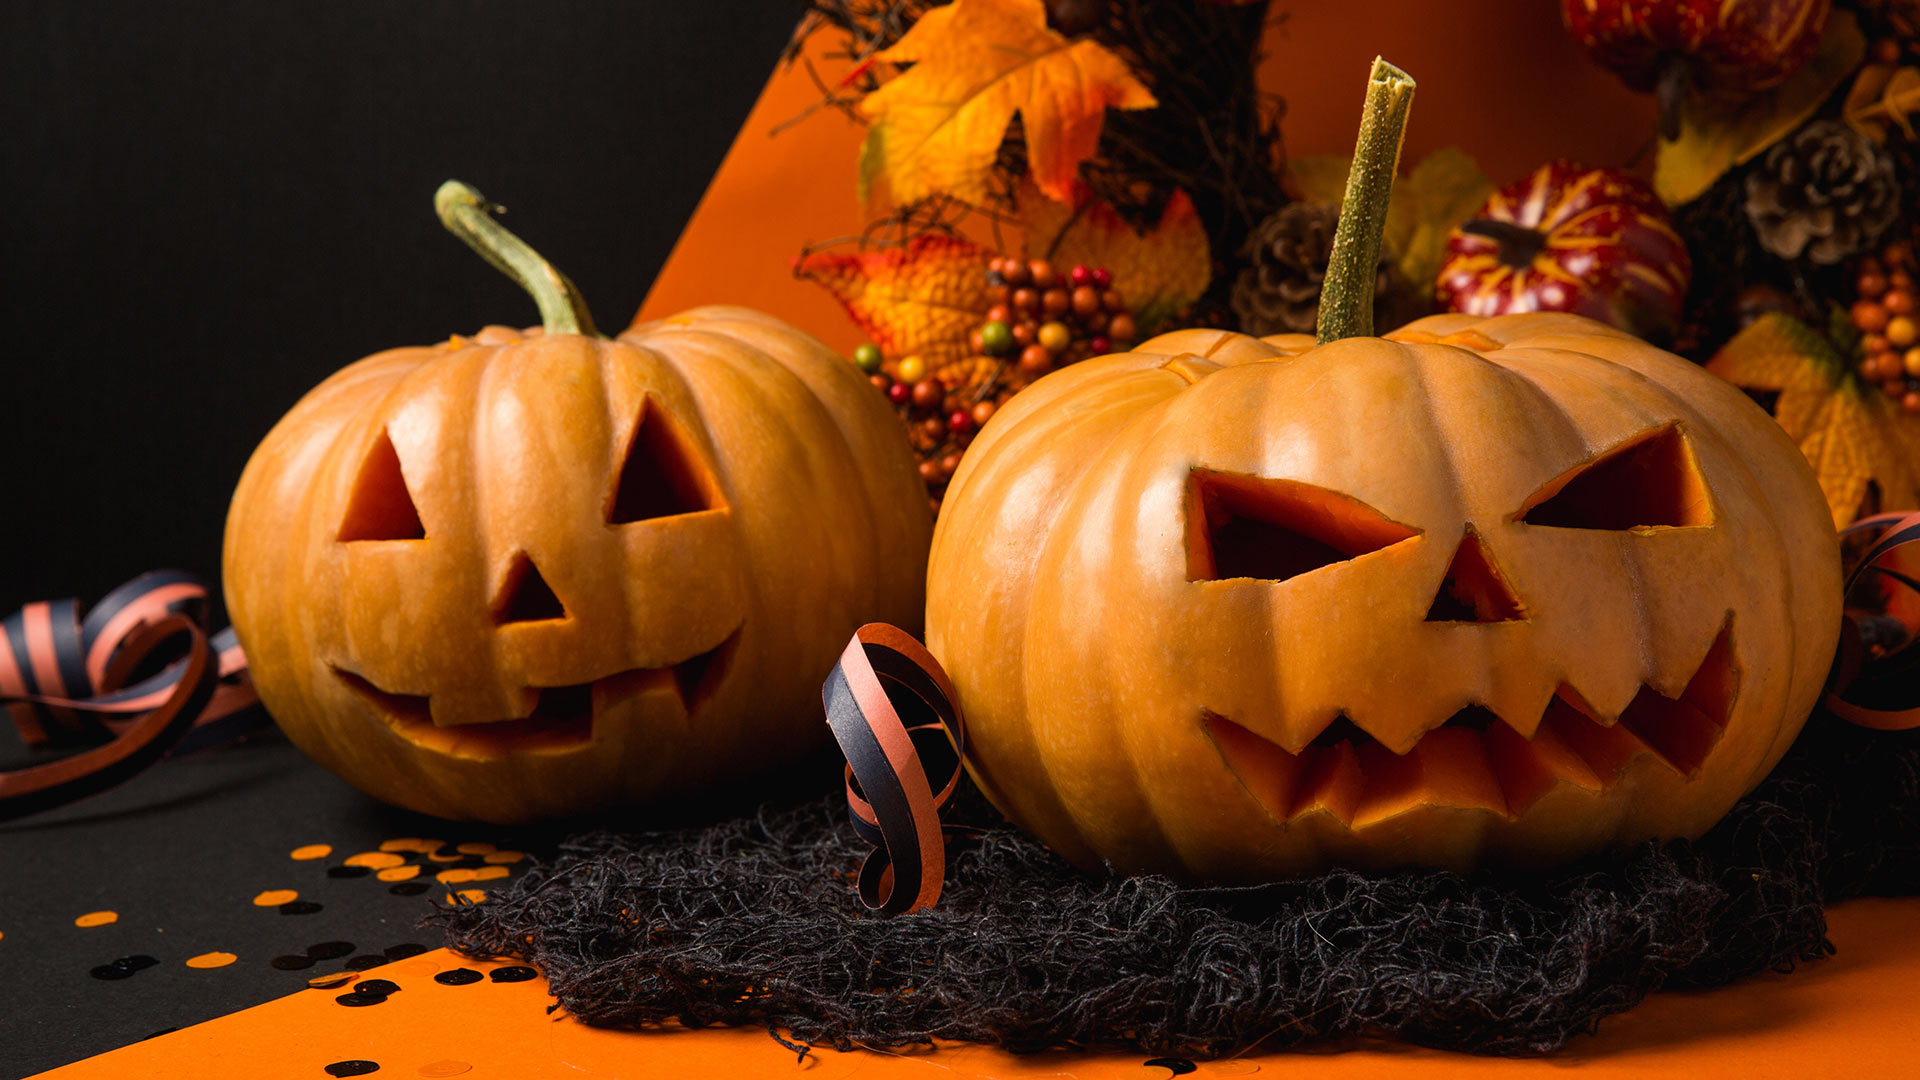 Carved pumpkins and Halloween decorations